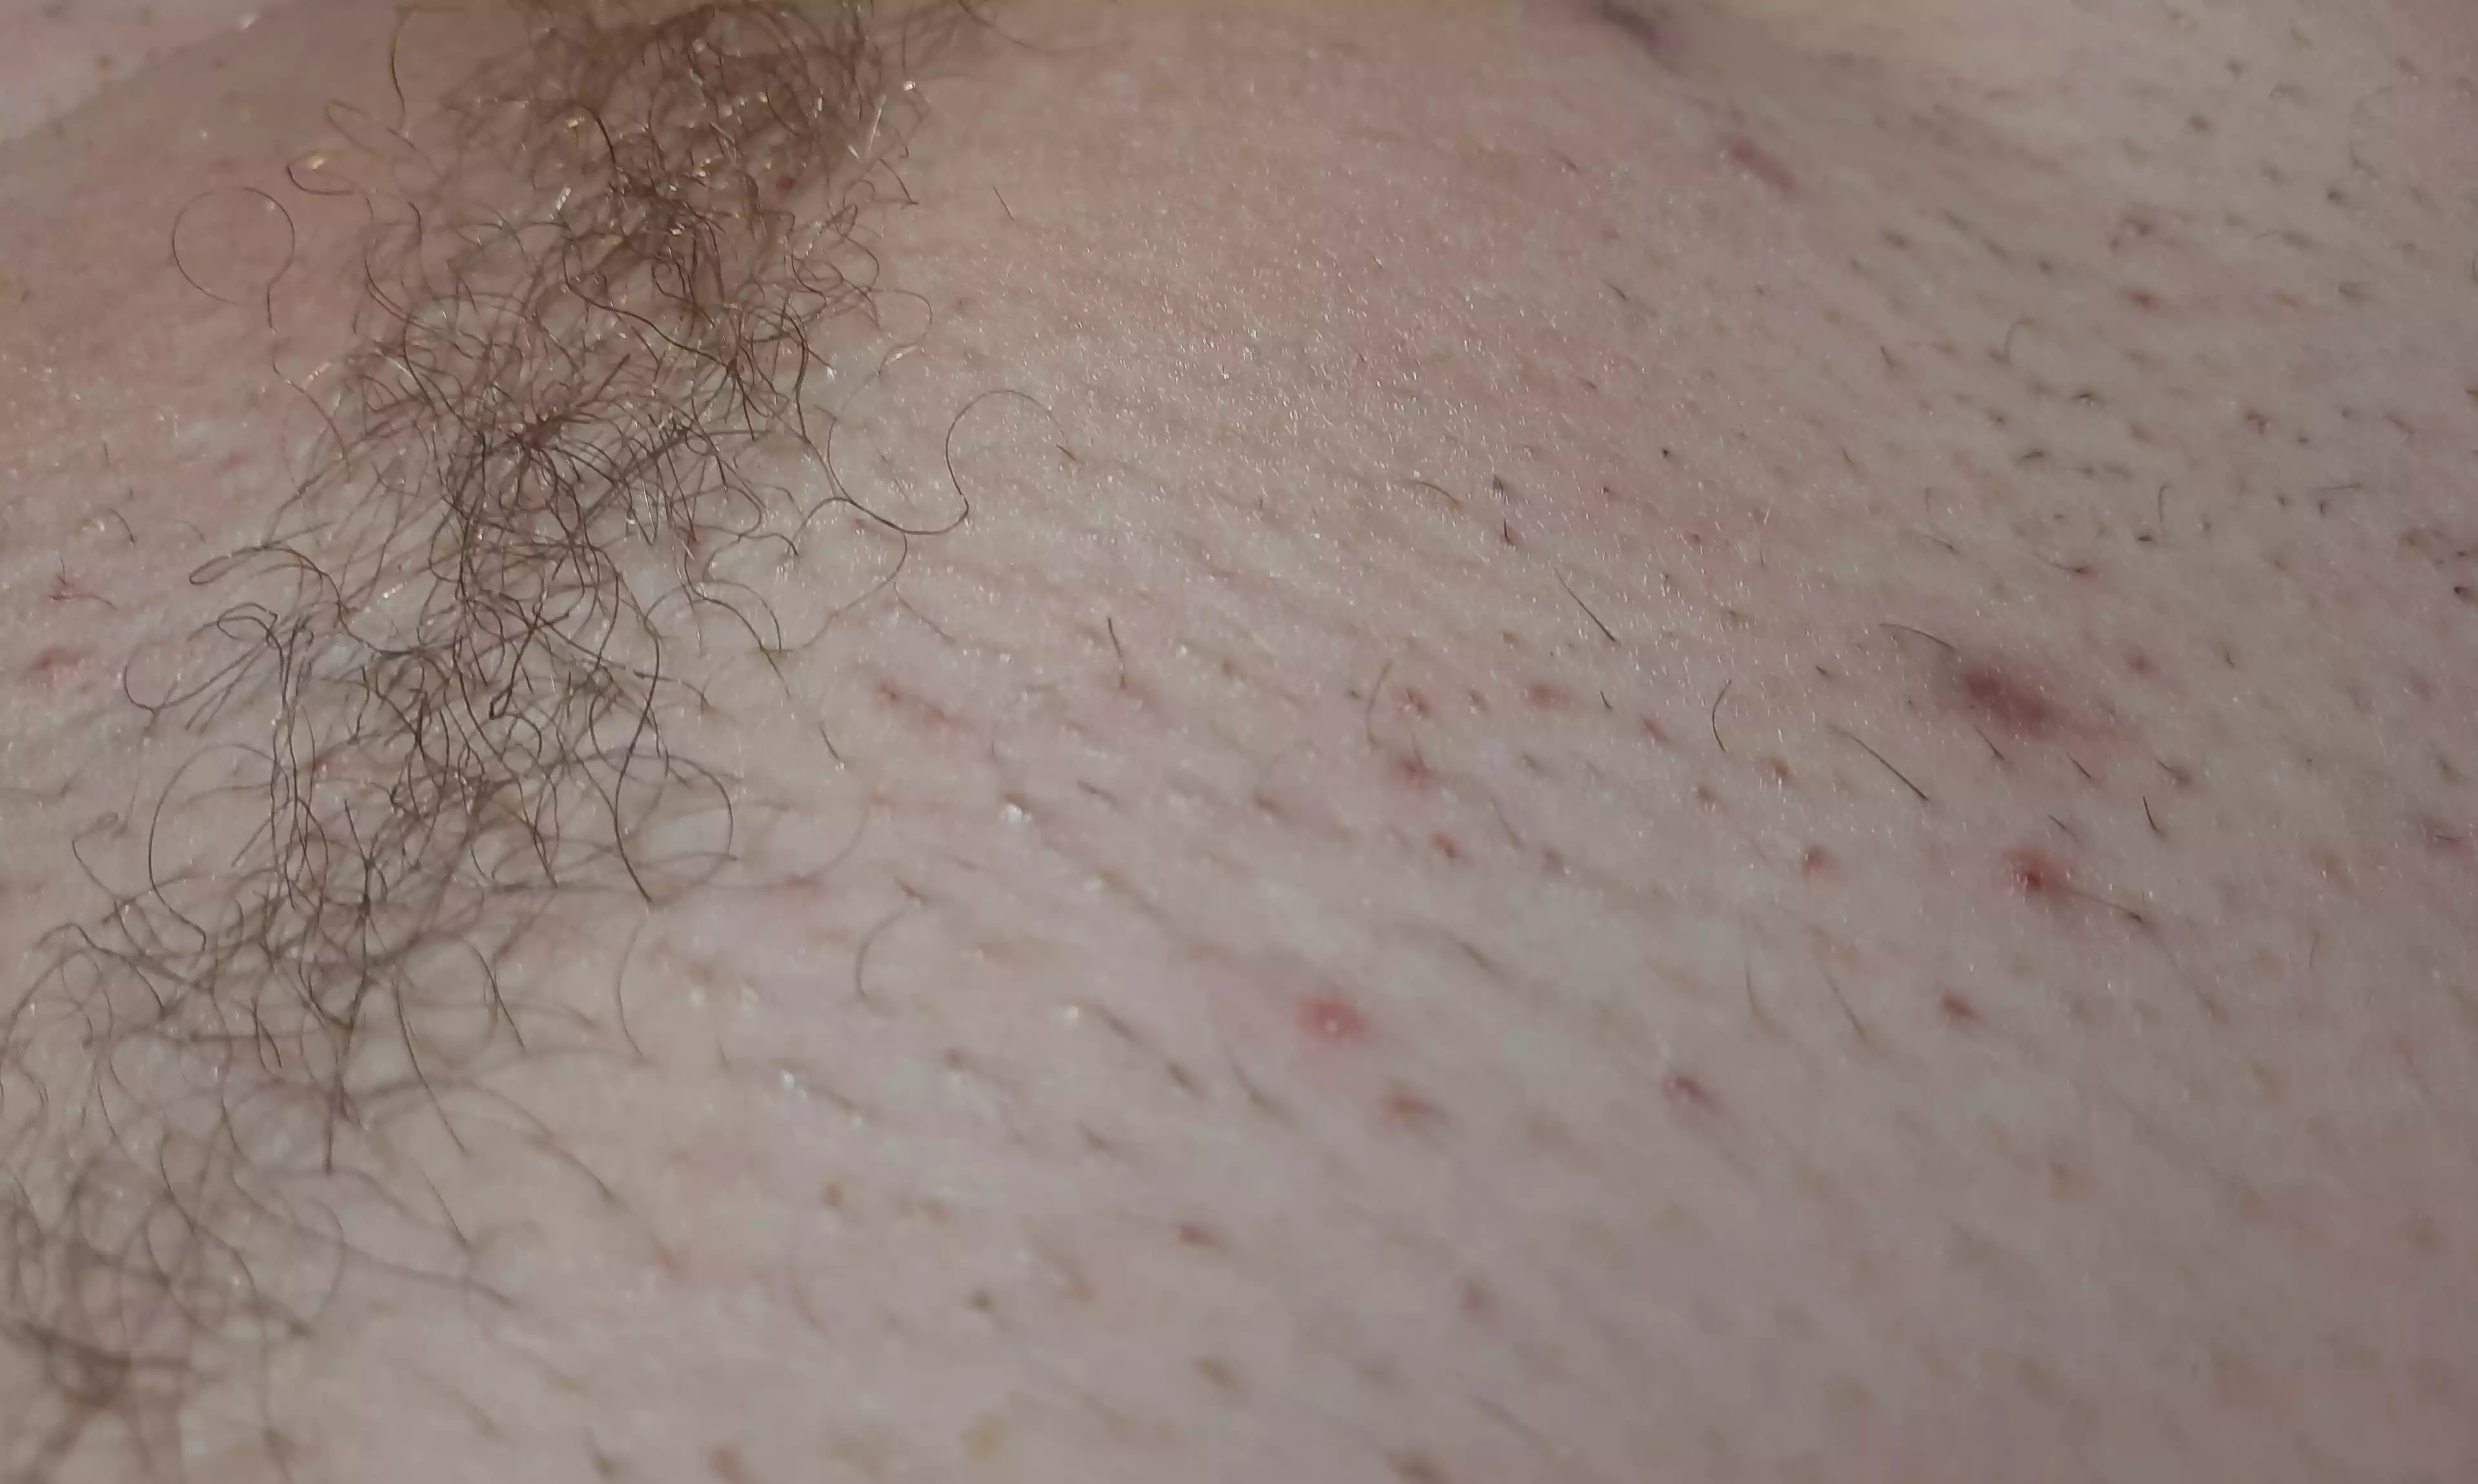 Rerowth red spots in pubic waxing